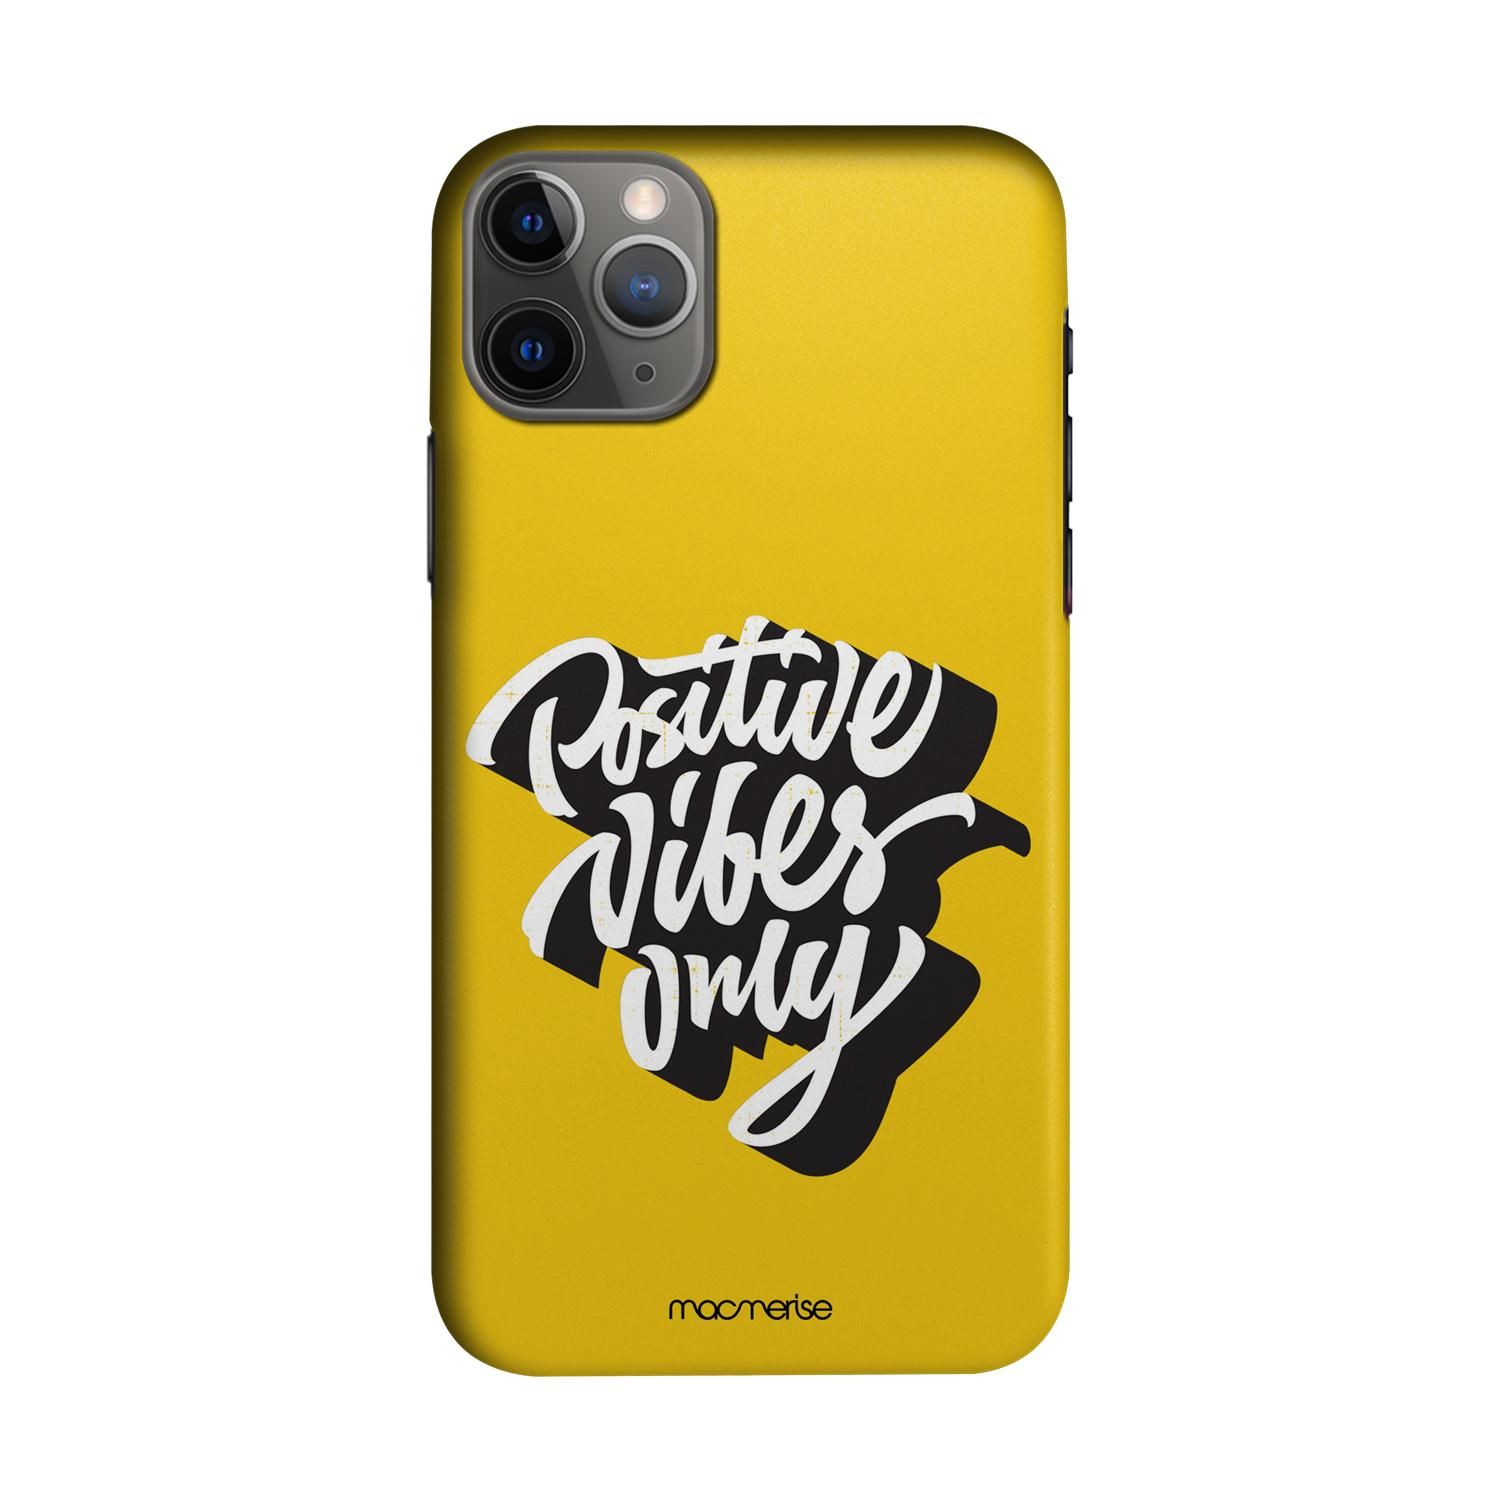 Buy Positive Vibes only - Sleek Phone Case for iPhone 11 Pro Online